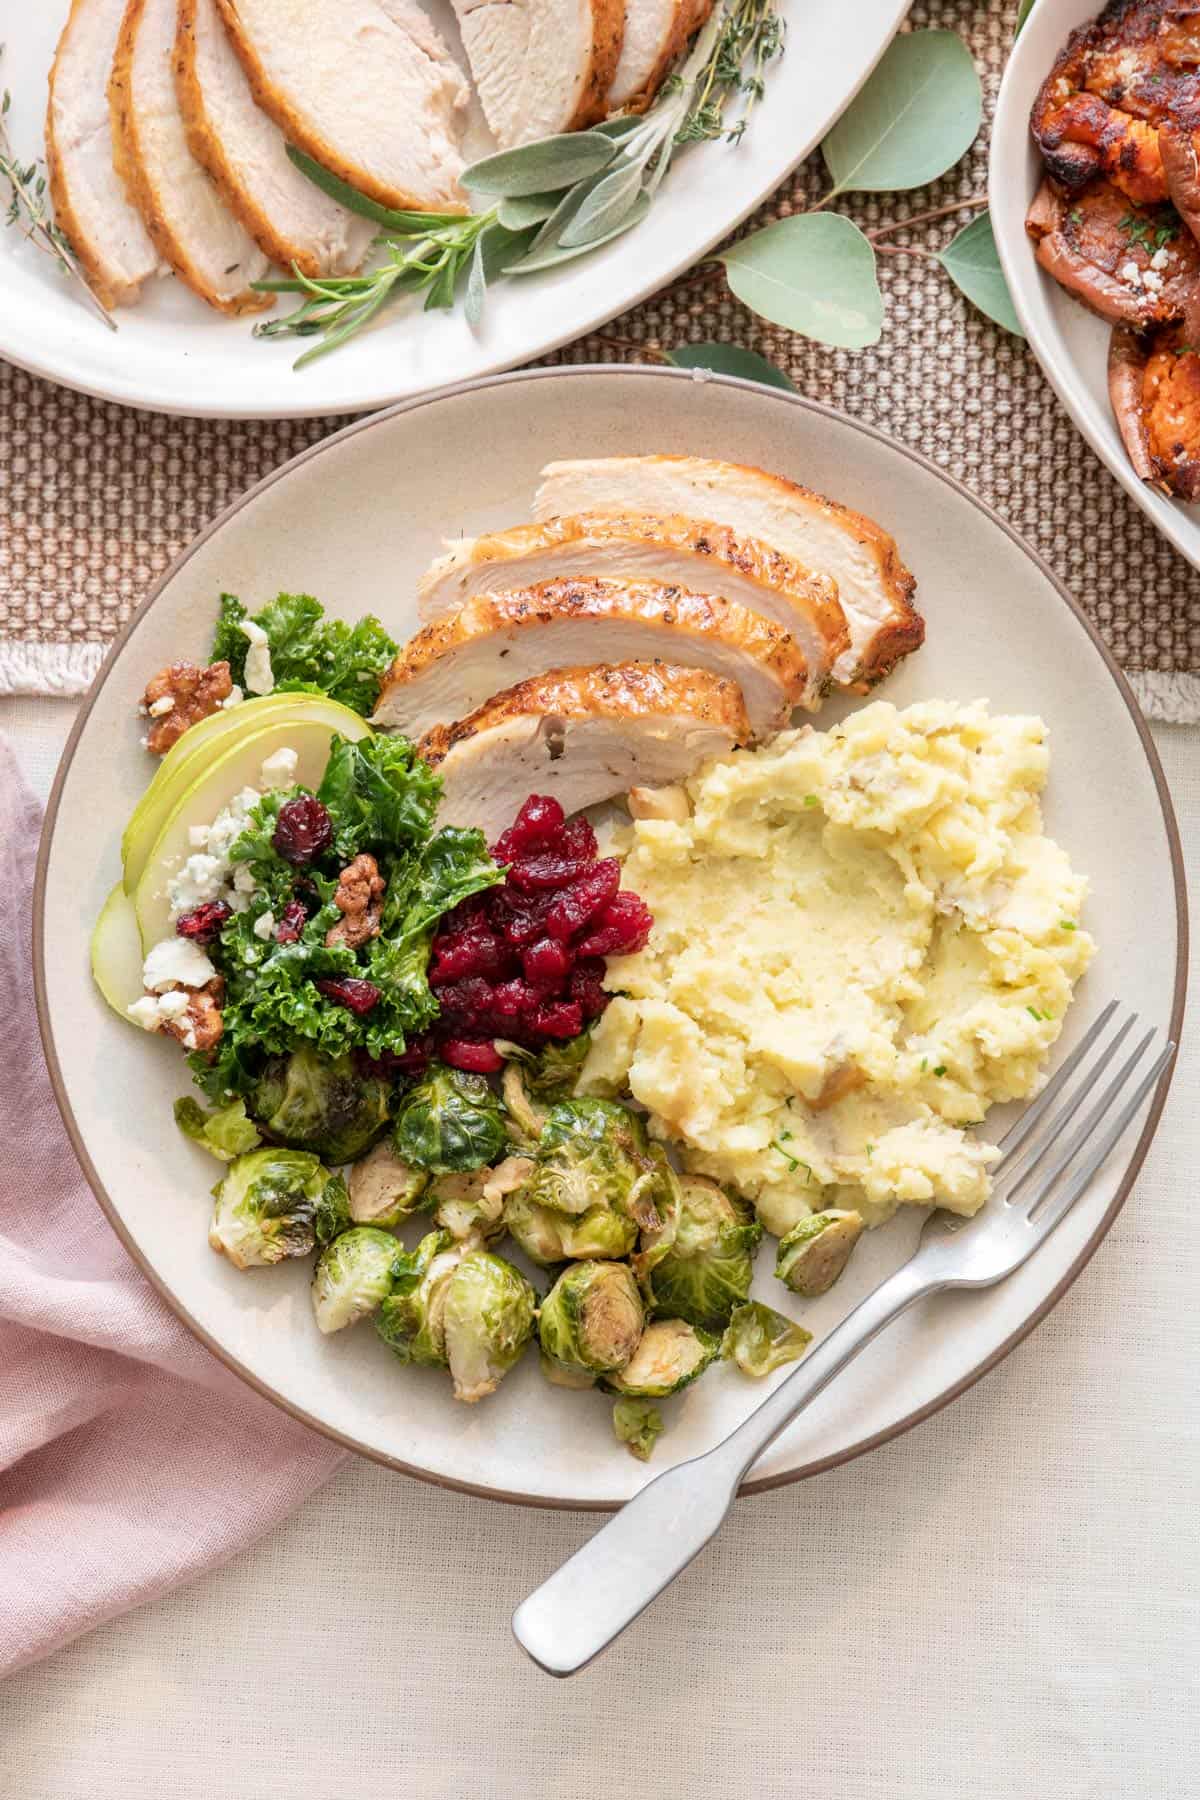 Plate with turkey, pear slad, cranberry sauce, mashed potatoes, and brussels sprouts with fork.